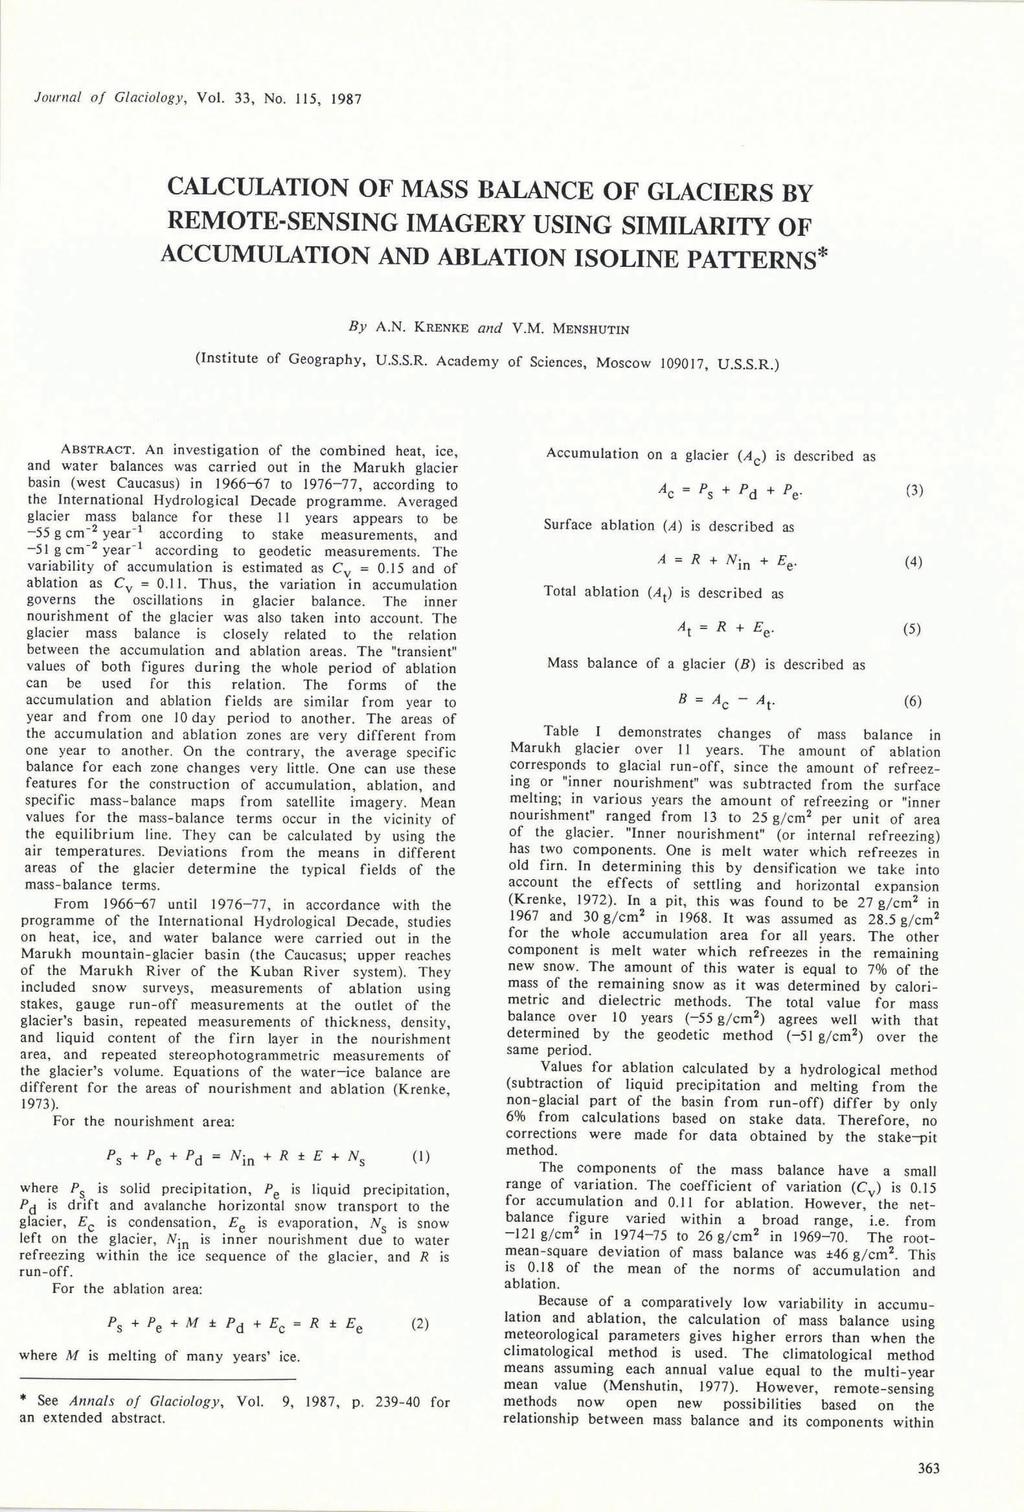 Jou/"Ilal 0/ Glaciology, Vo!. 33, No. 115, 1987 CALCULATION OF MASS BALANCE OF GLACIERS BY REMOTE-SENSING IMAGERY USING SIMILARITY OF ACCUMULATION AND ABLATION ISOLINE PATTERNS* By A.N. KRENKE and V.